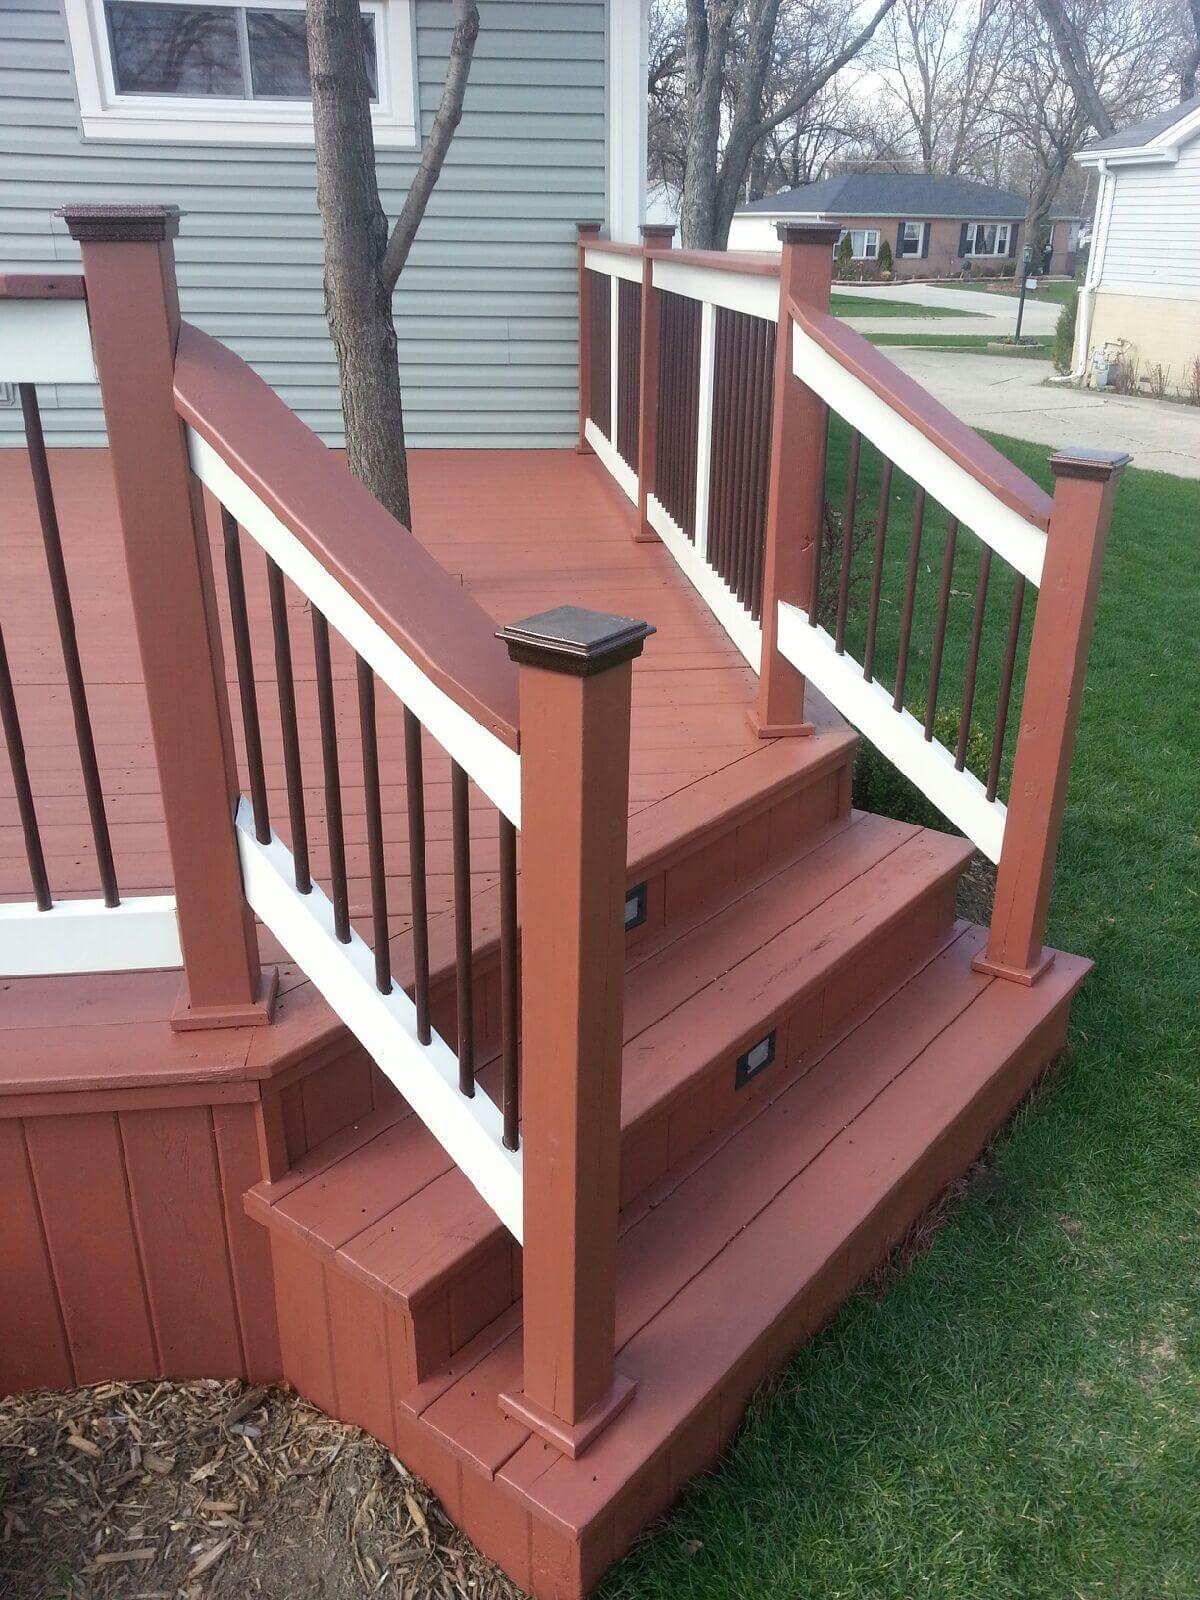 Repairs and maintenance for your deck, fence, and exterior wood staining. - Deck Staining Batavia - Deck Cleaning Services